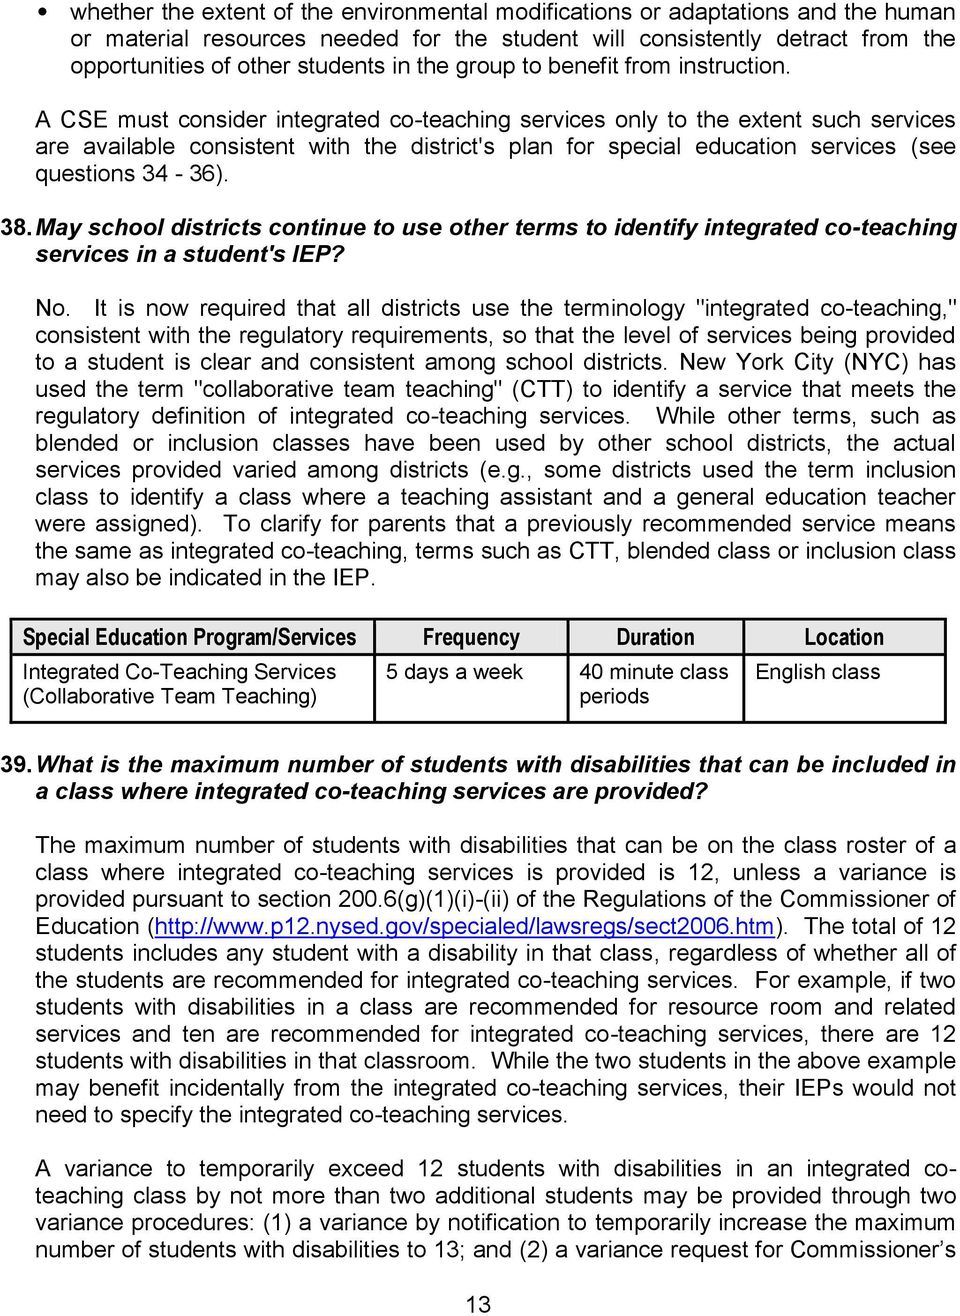 A CSE must consider integrated co-teaching services only to the extent such services are available consistent with the district's plan for special education services (see questions 34-36). 38.